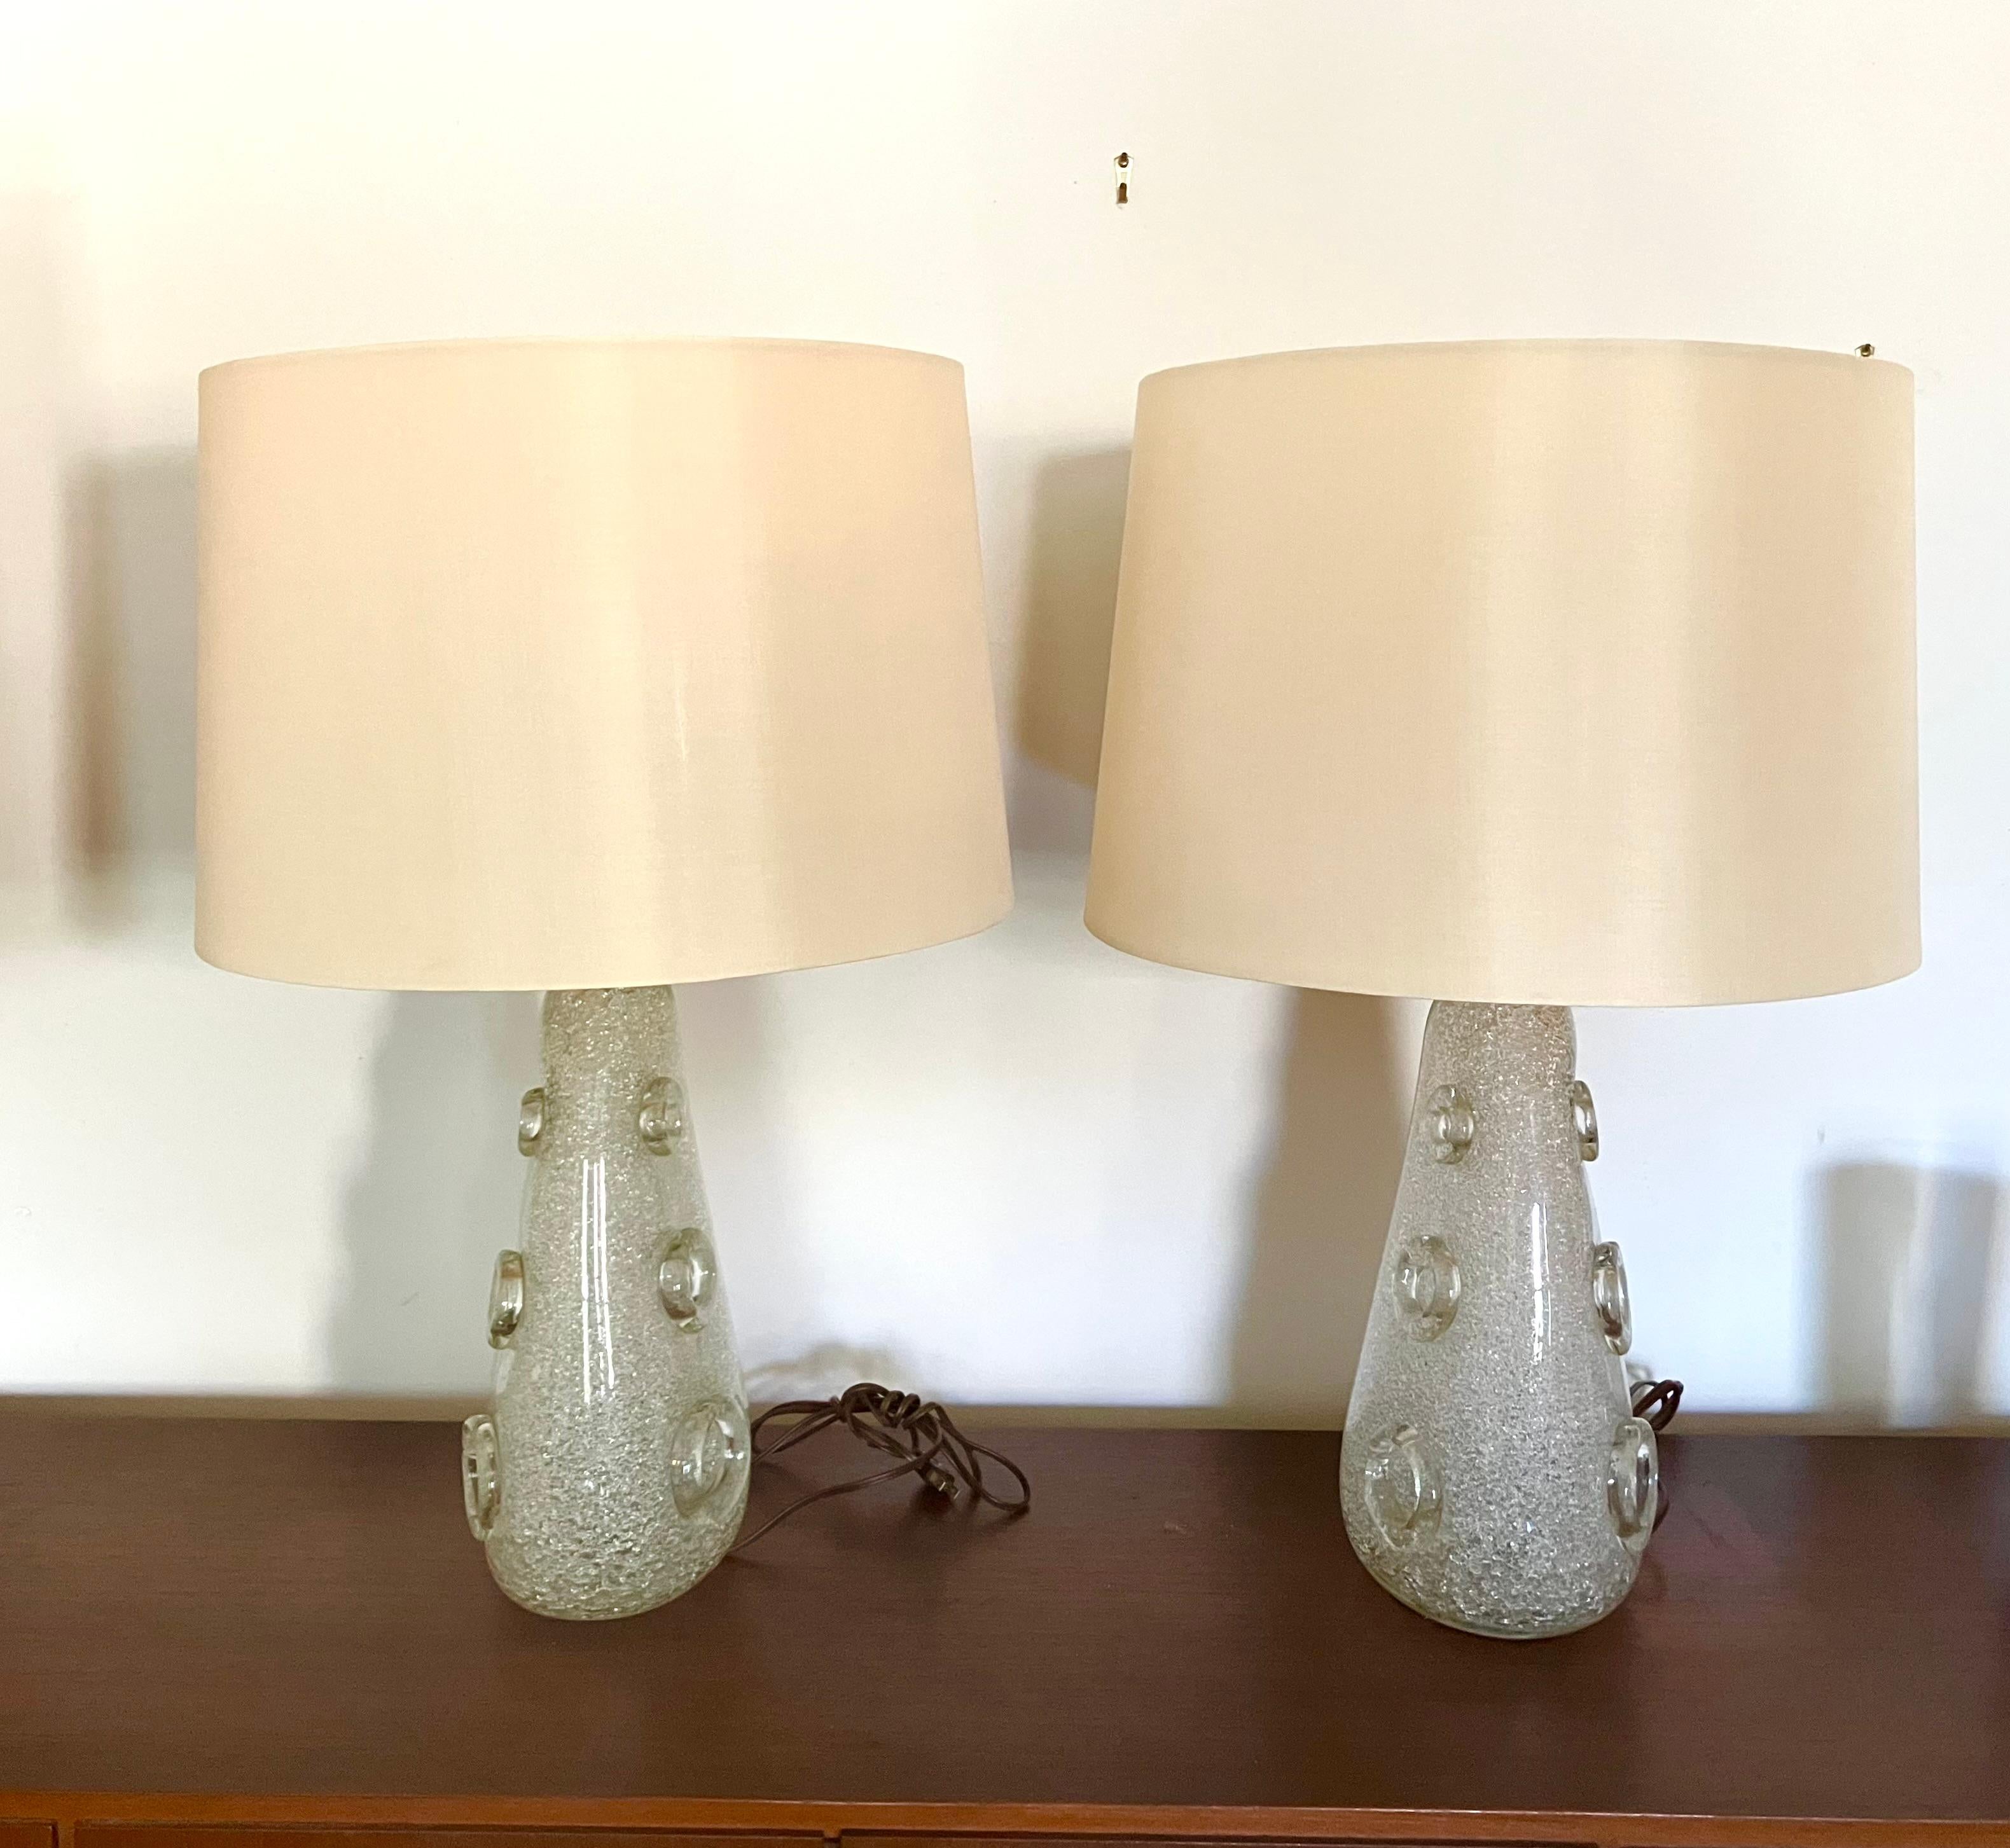 A rare pair of ‘Dew Glass’ table lamps, produced by Barovier & Toso. Ercole Barovier invented the Rugiada technique in 1938, and the process was patented and exclusive to the company. It involves the application of colorless glass grit and shards